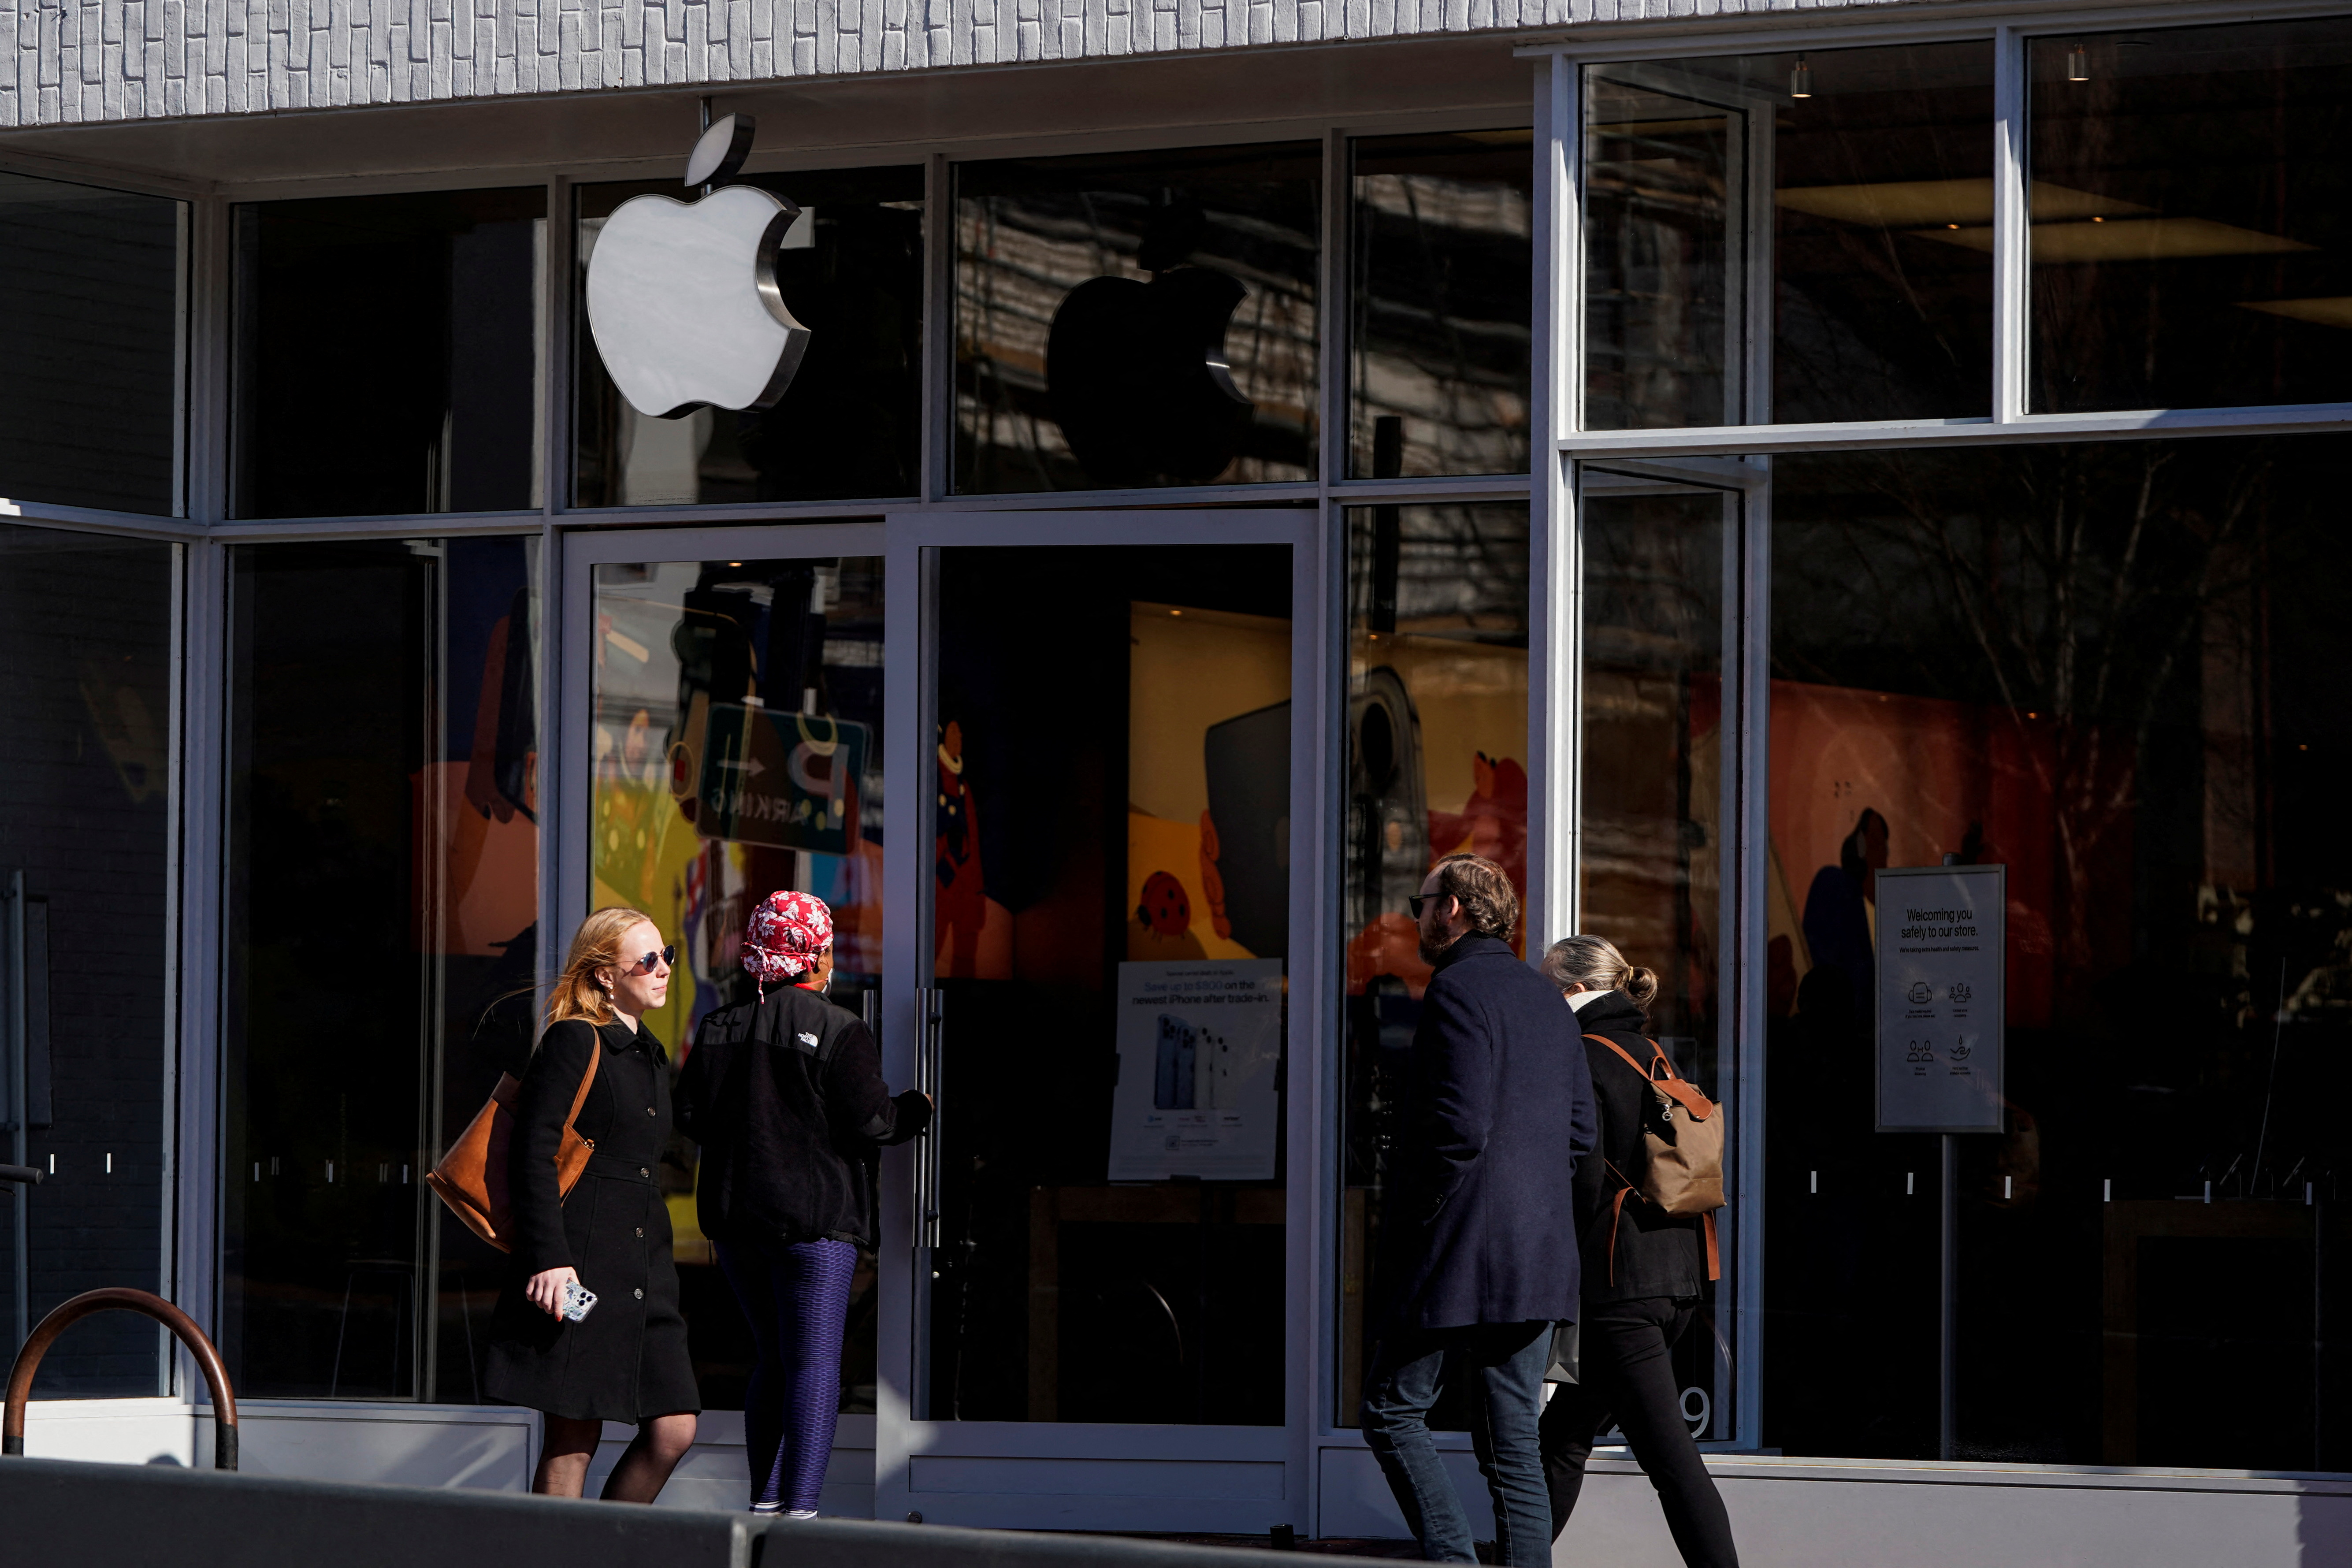 Pedestrians walk past an Apple store as Apple Inc. reports its fourth quarter results in Washington, U.S., January 27, 2022. REUTERS/Joshua Roberts